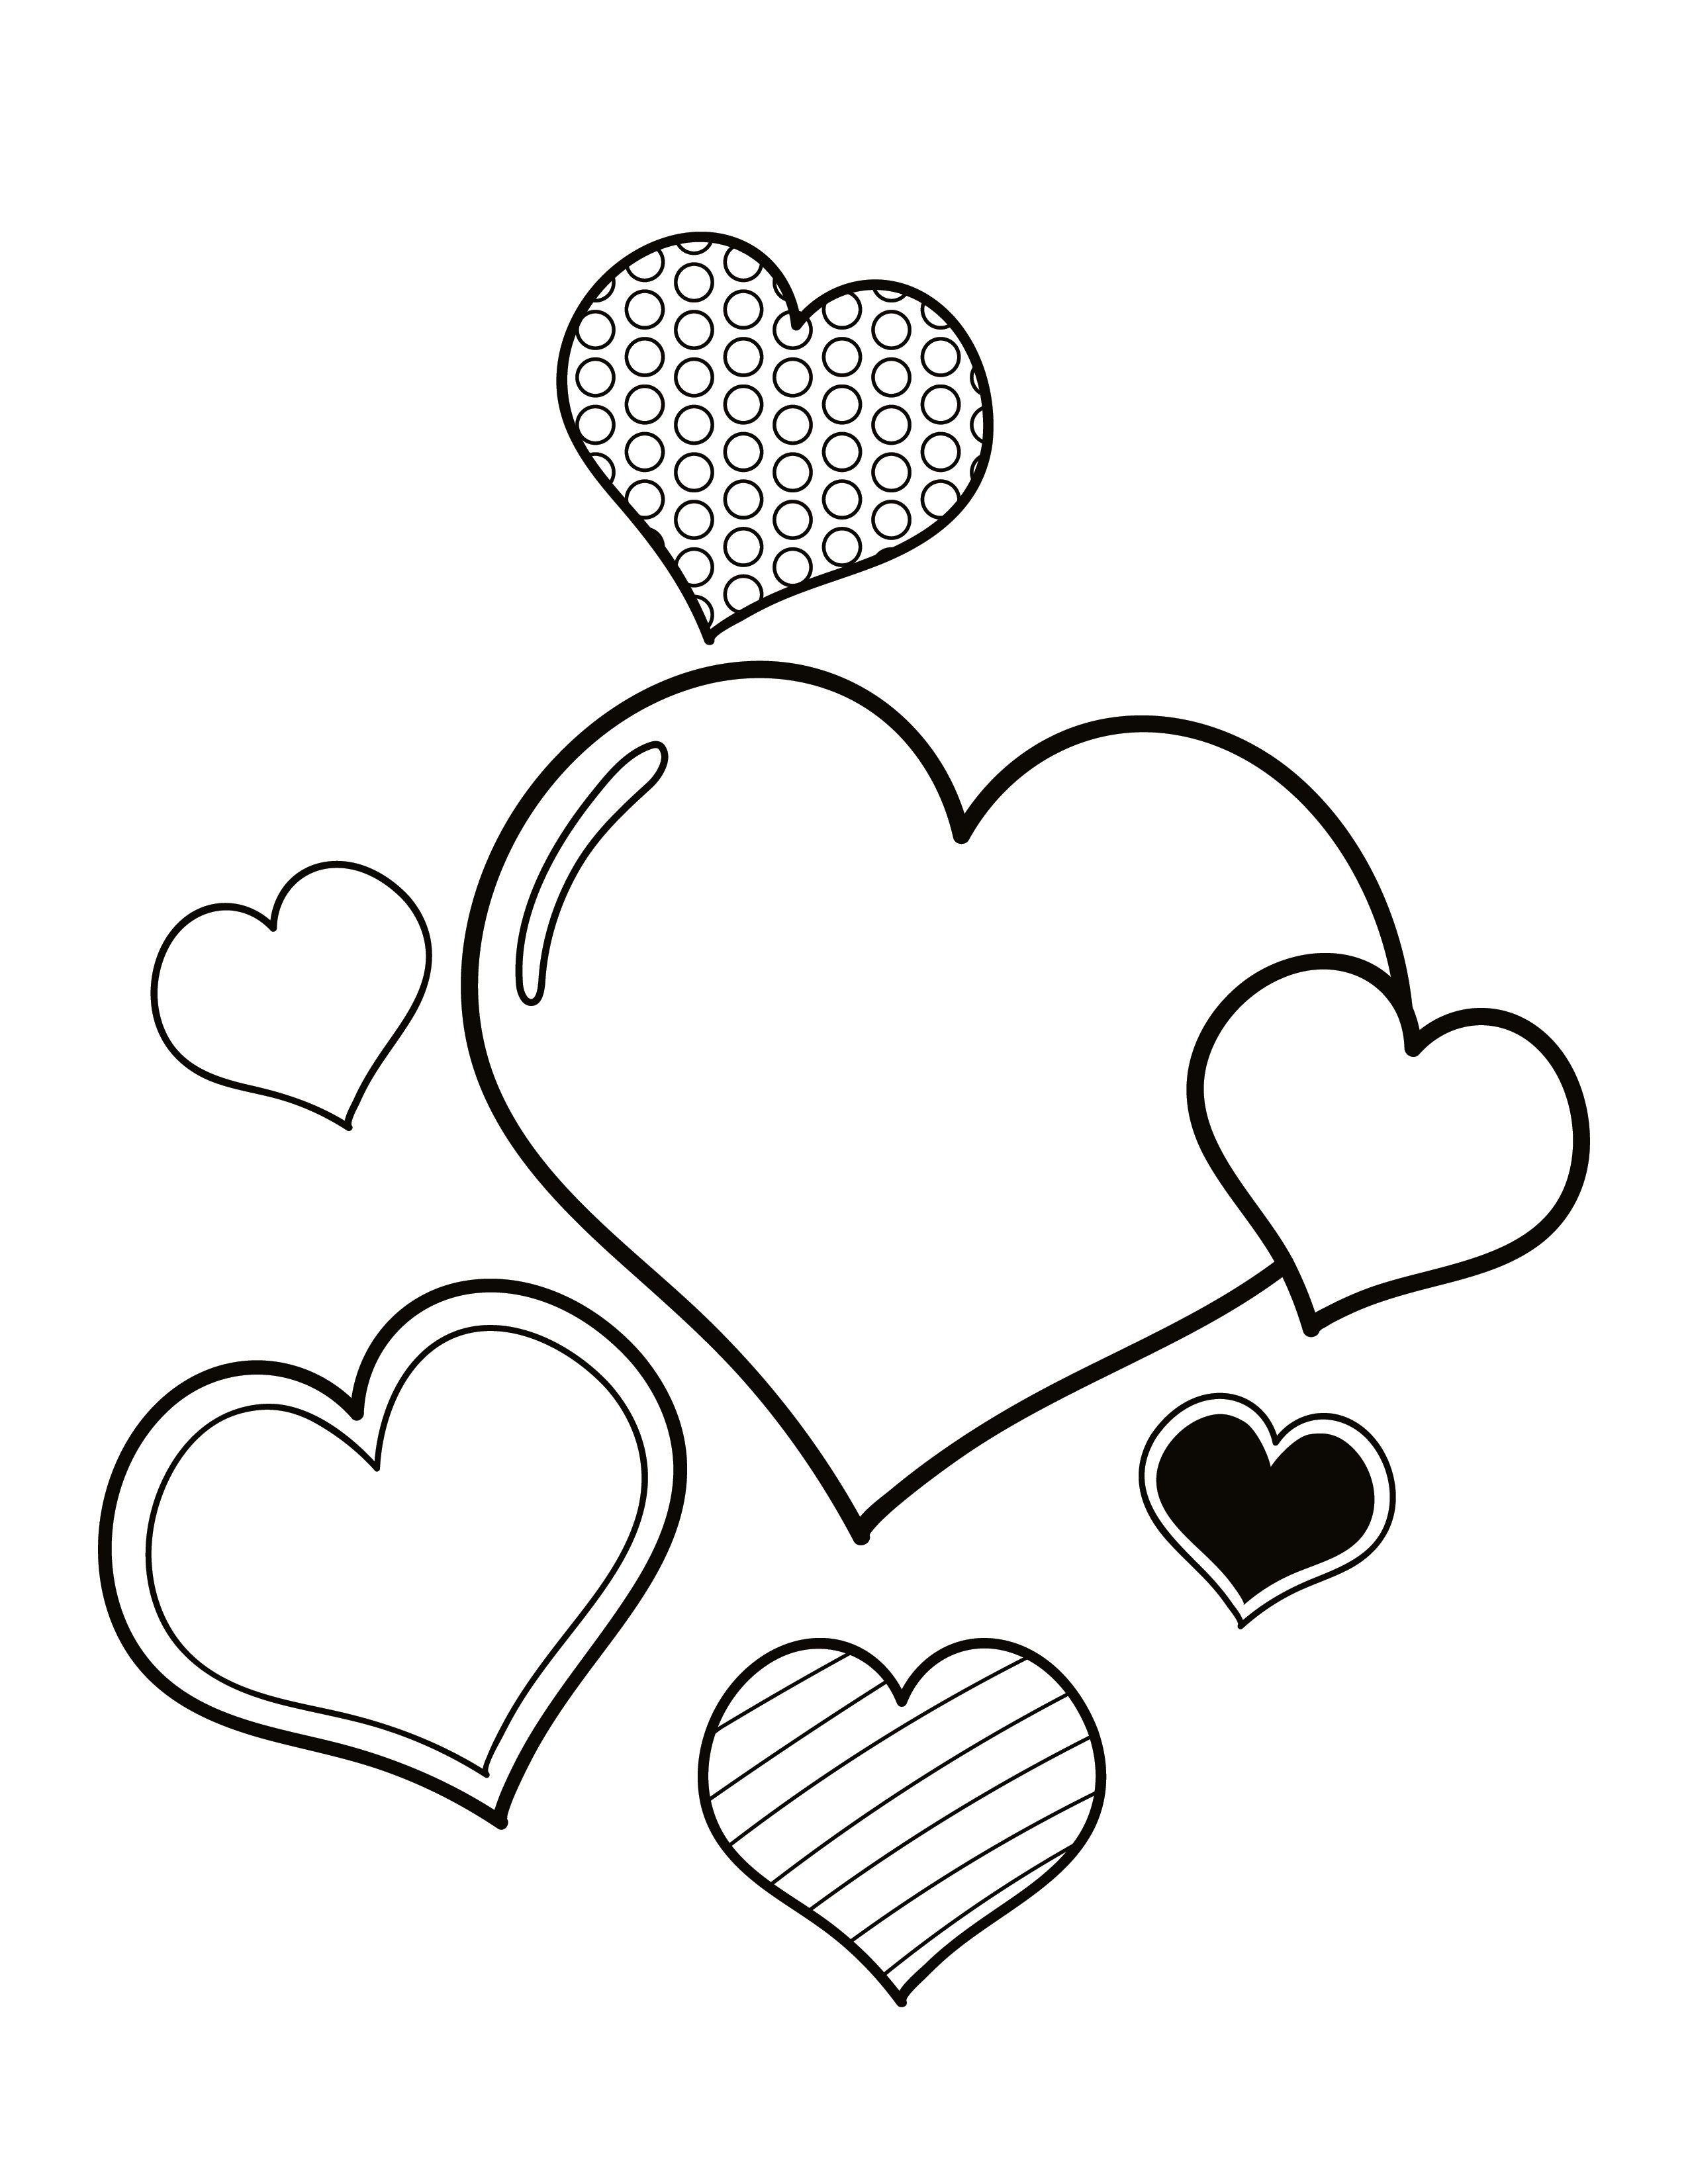 20+ Coloring Page Heart Images